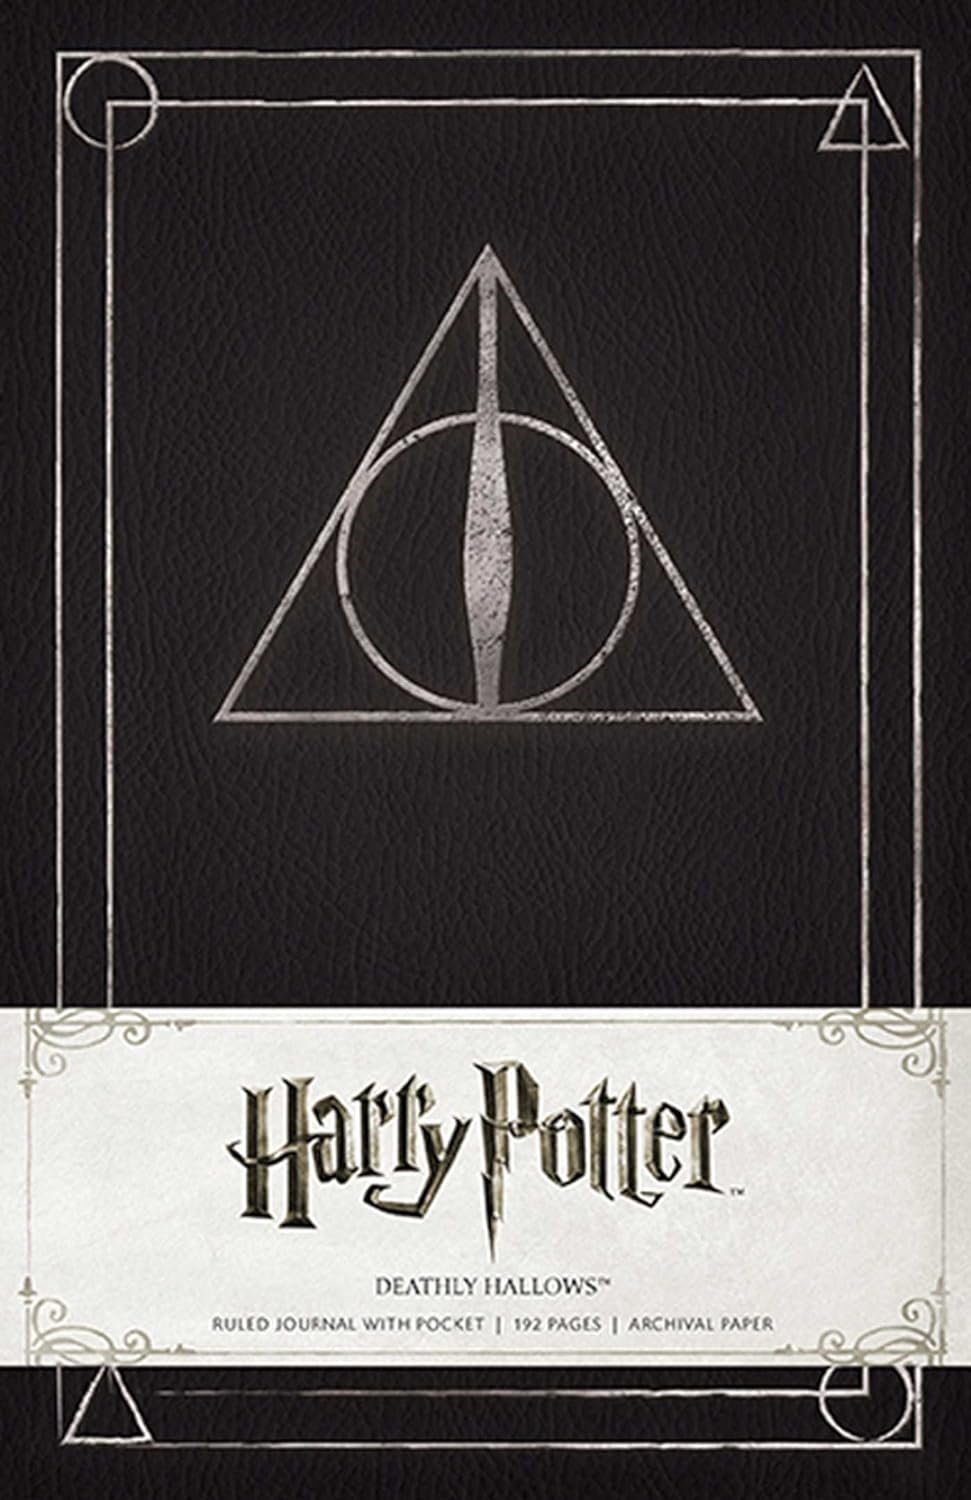 A high-quality Harry Potter Deathly Hallows Hardcover Ruled Journal featuring the Deathly Hallows symbol centered on a black background, framed by ornate white borders that include the title and journal details. Published by Warner Bros. Consumer Products Inc. (Author)